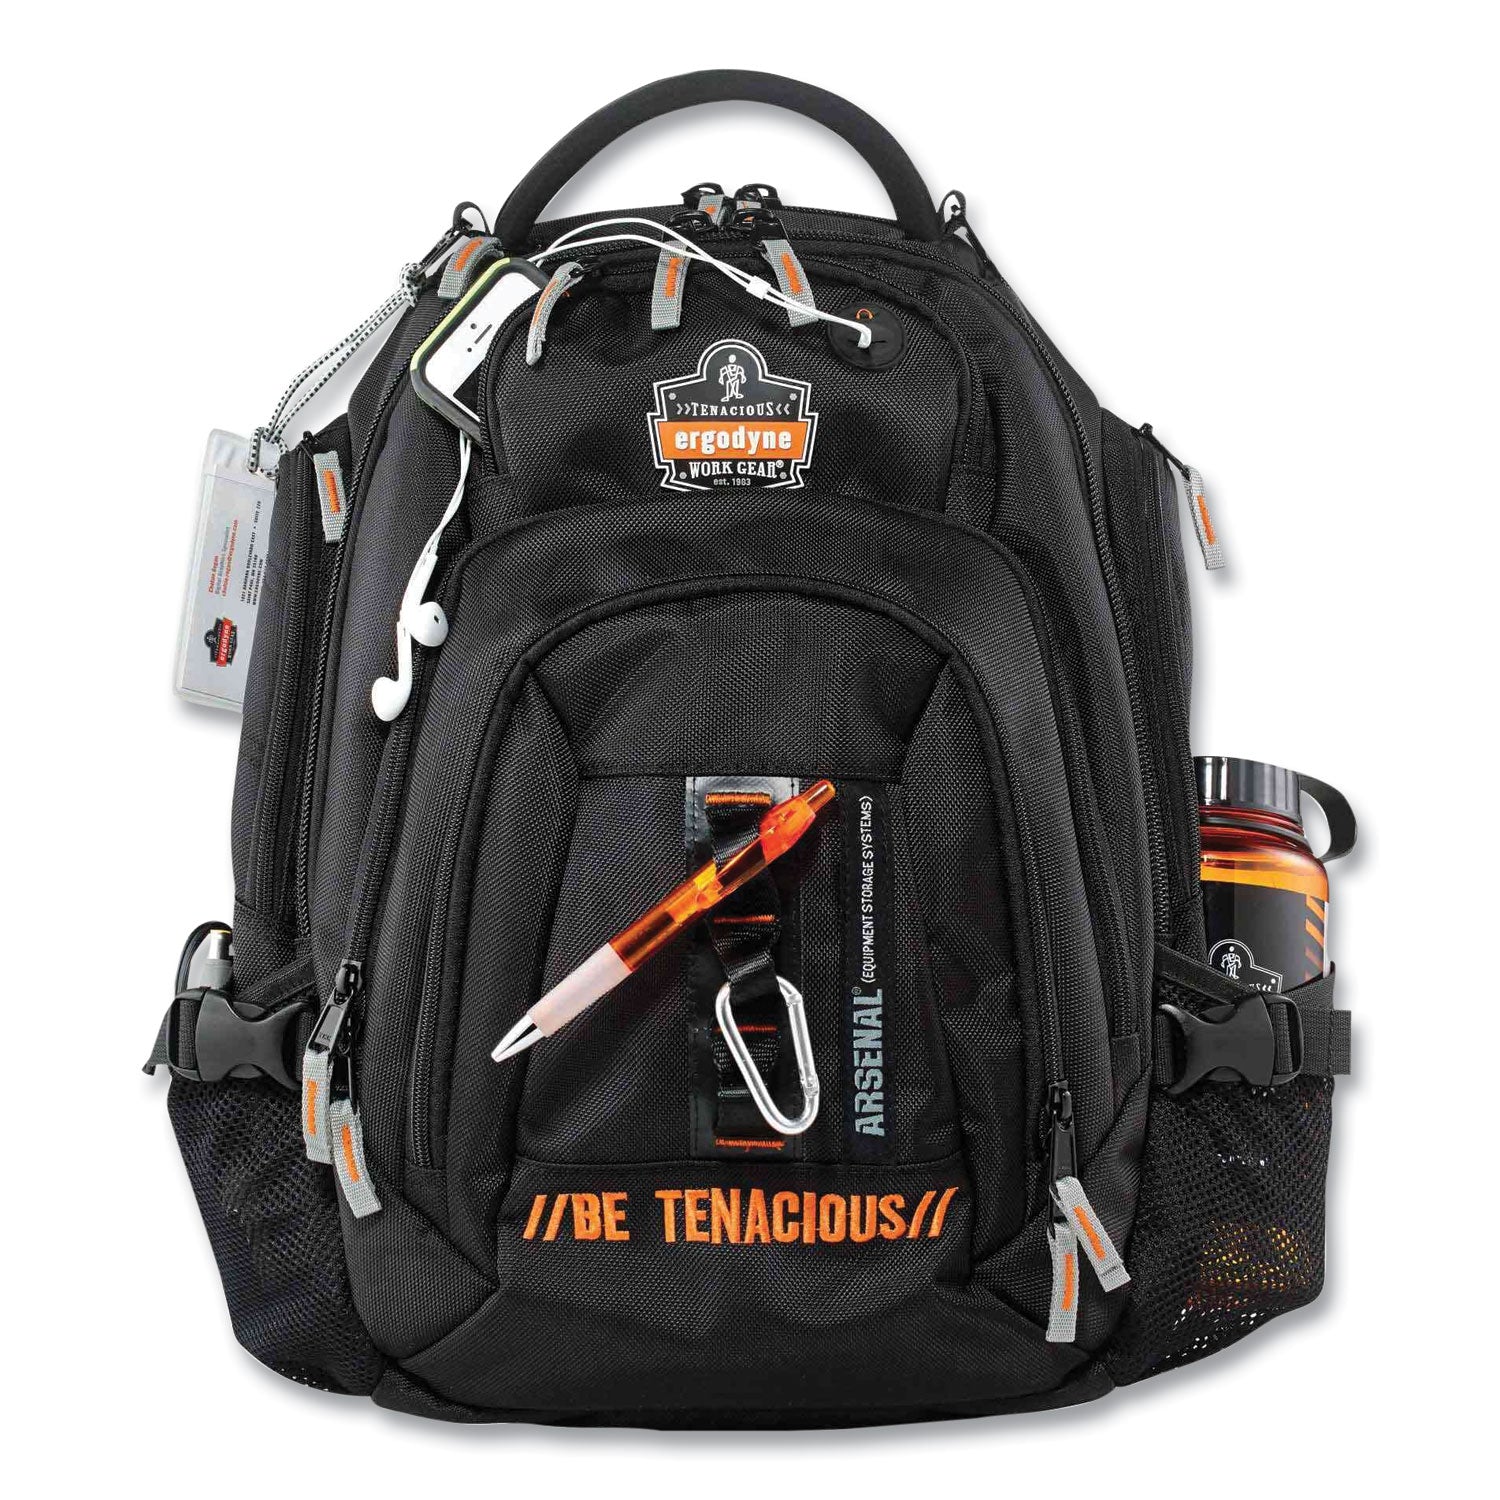 arsenal-5144-mobile-office-backpack-8-x-14-x-28-black-ships-in-1-3-business-days_ego13044 - 4